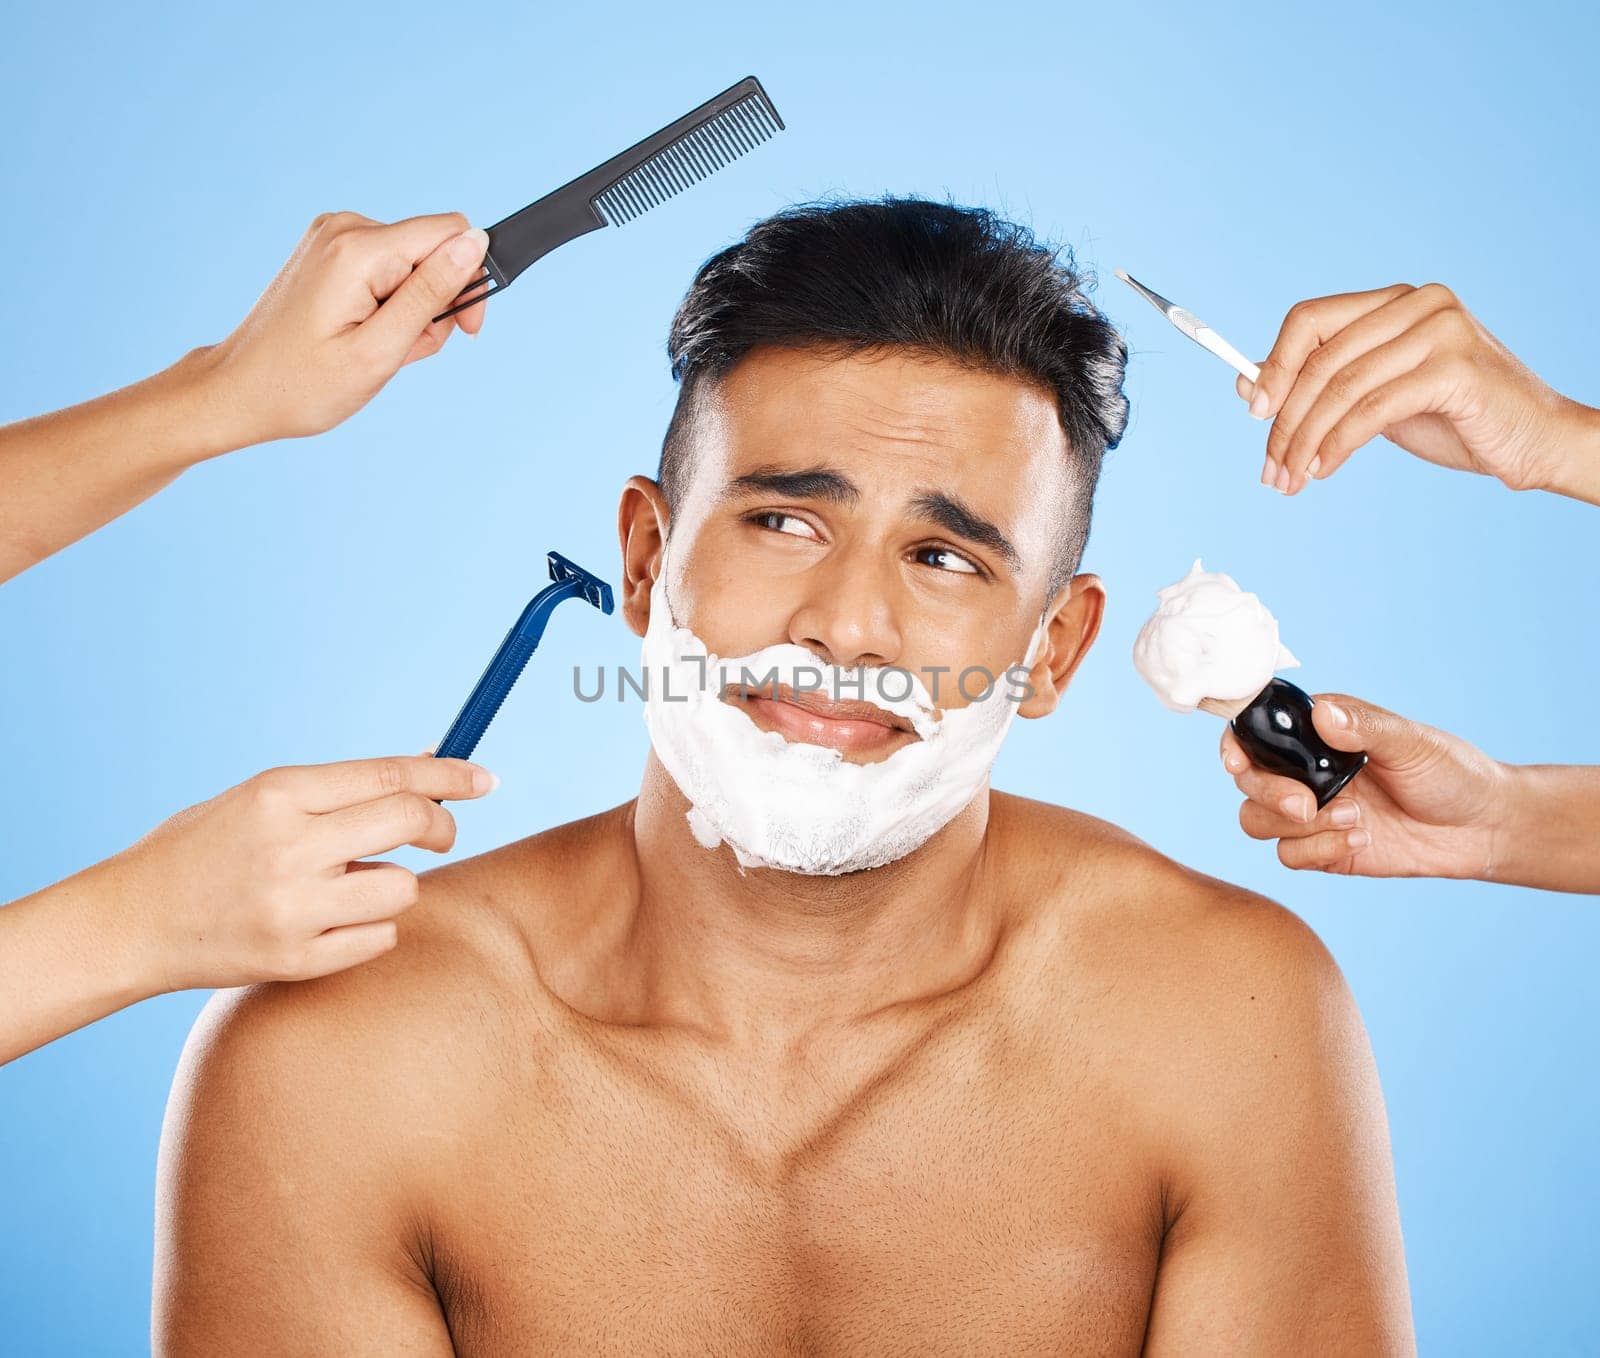 Hands, cleaning and man in studio for makeover, skincare and shaving against a blue background. Hand, beauty and luxury with wellness model grooming, hair and skin treatment with cosmetic product by YuriArcurs